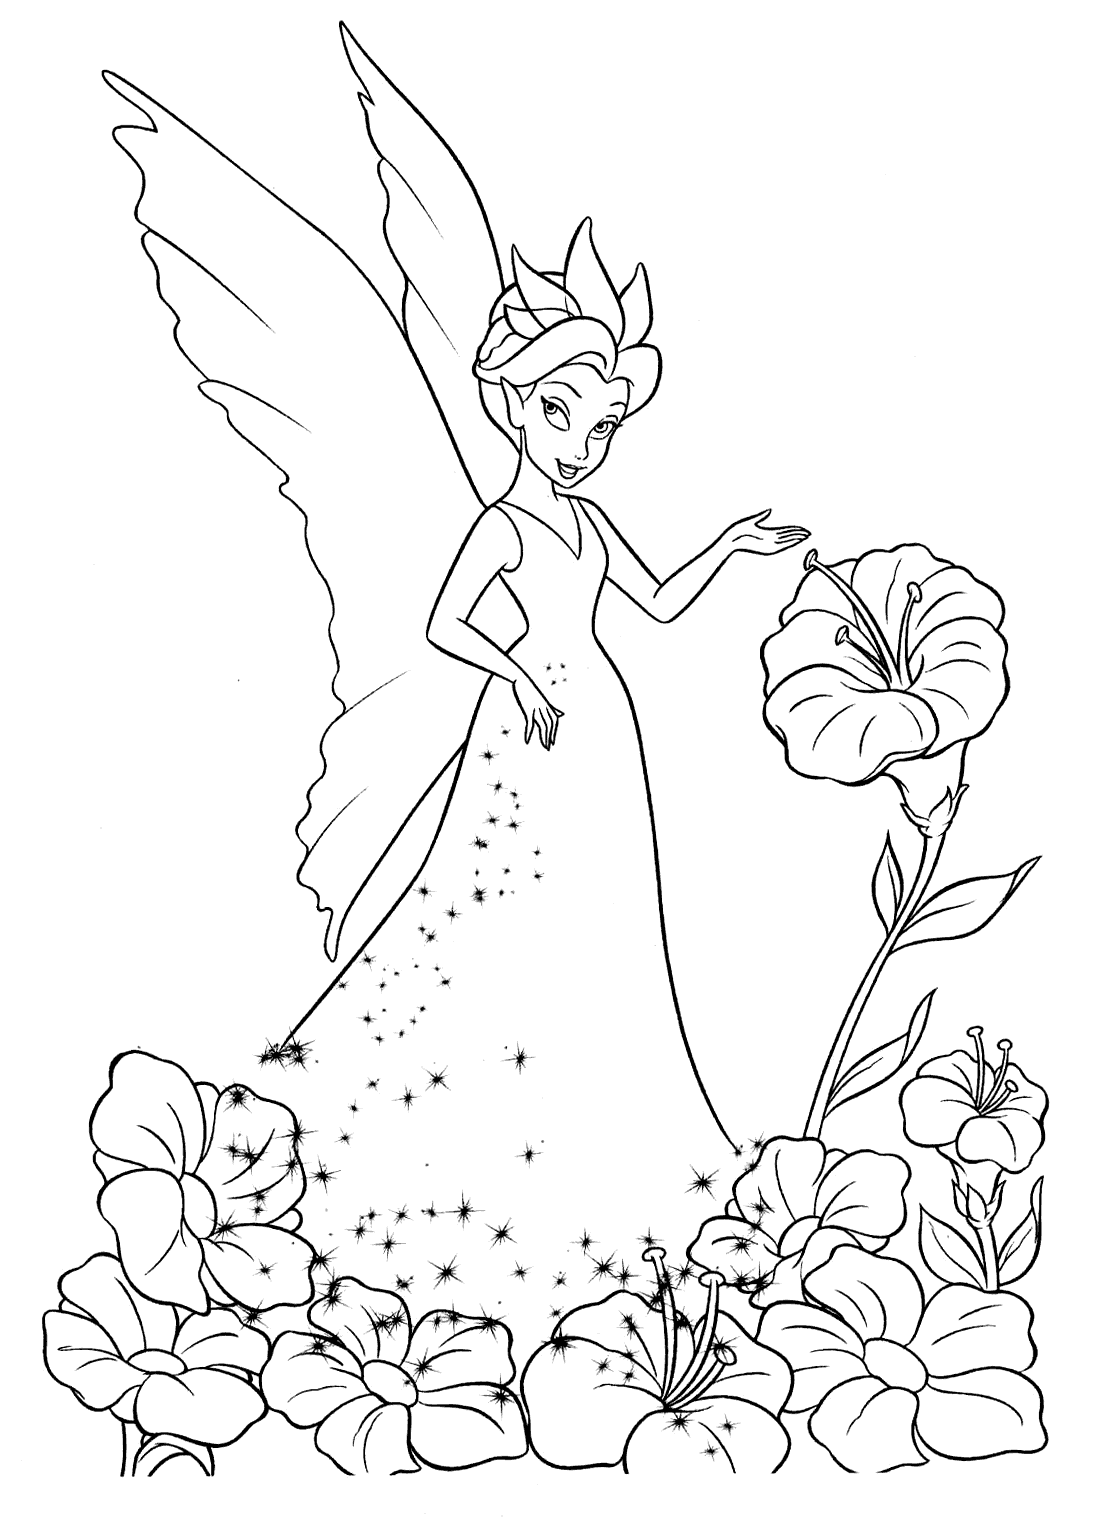 Download Coloring page - Fairy near a flower